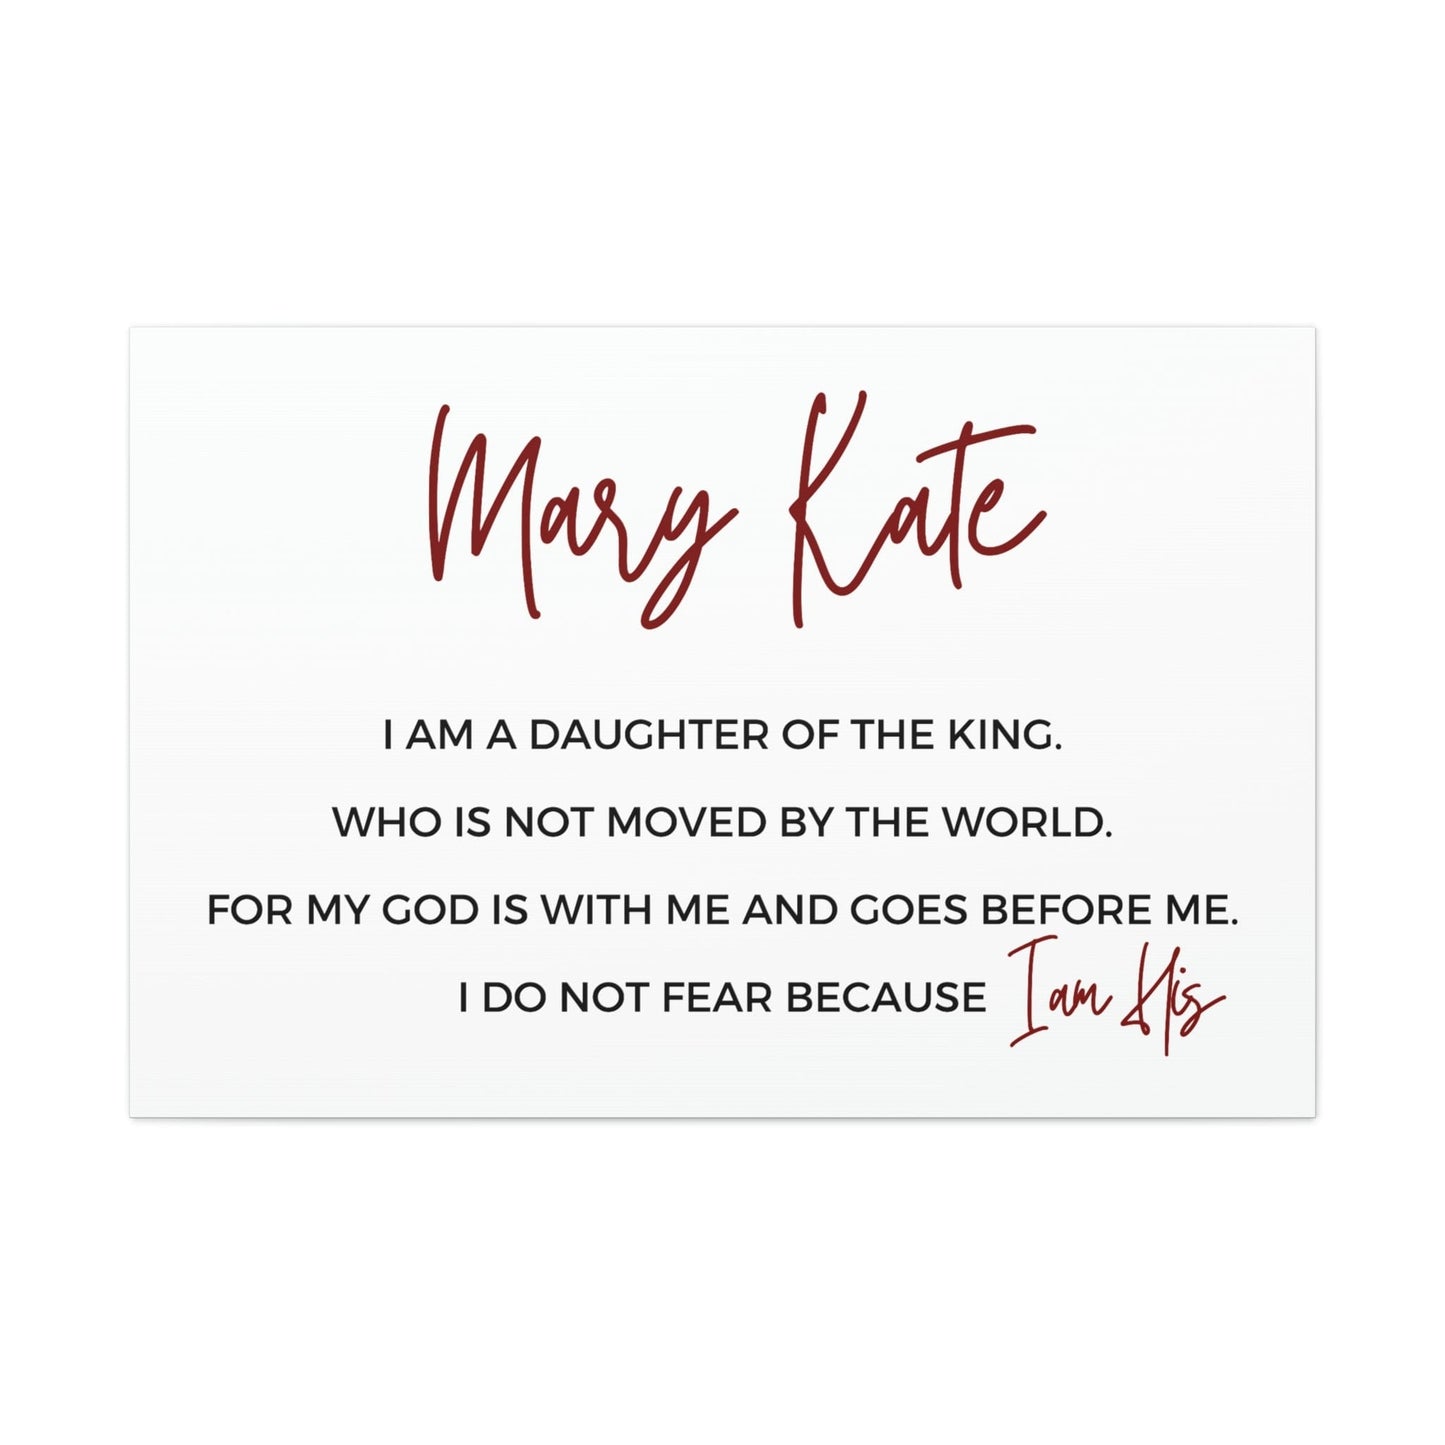 Personalized Christian Canvas Wall Art: 'I am the Daughter of the King'